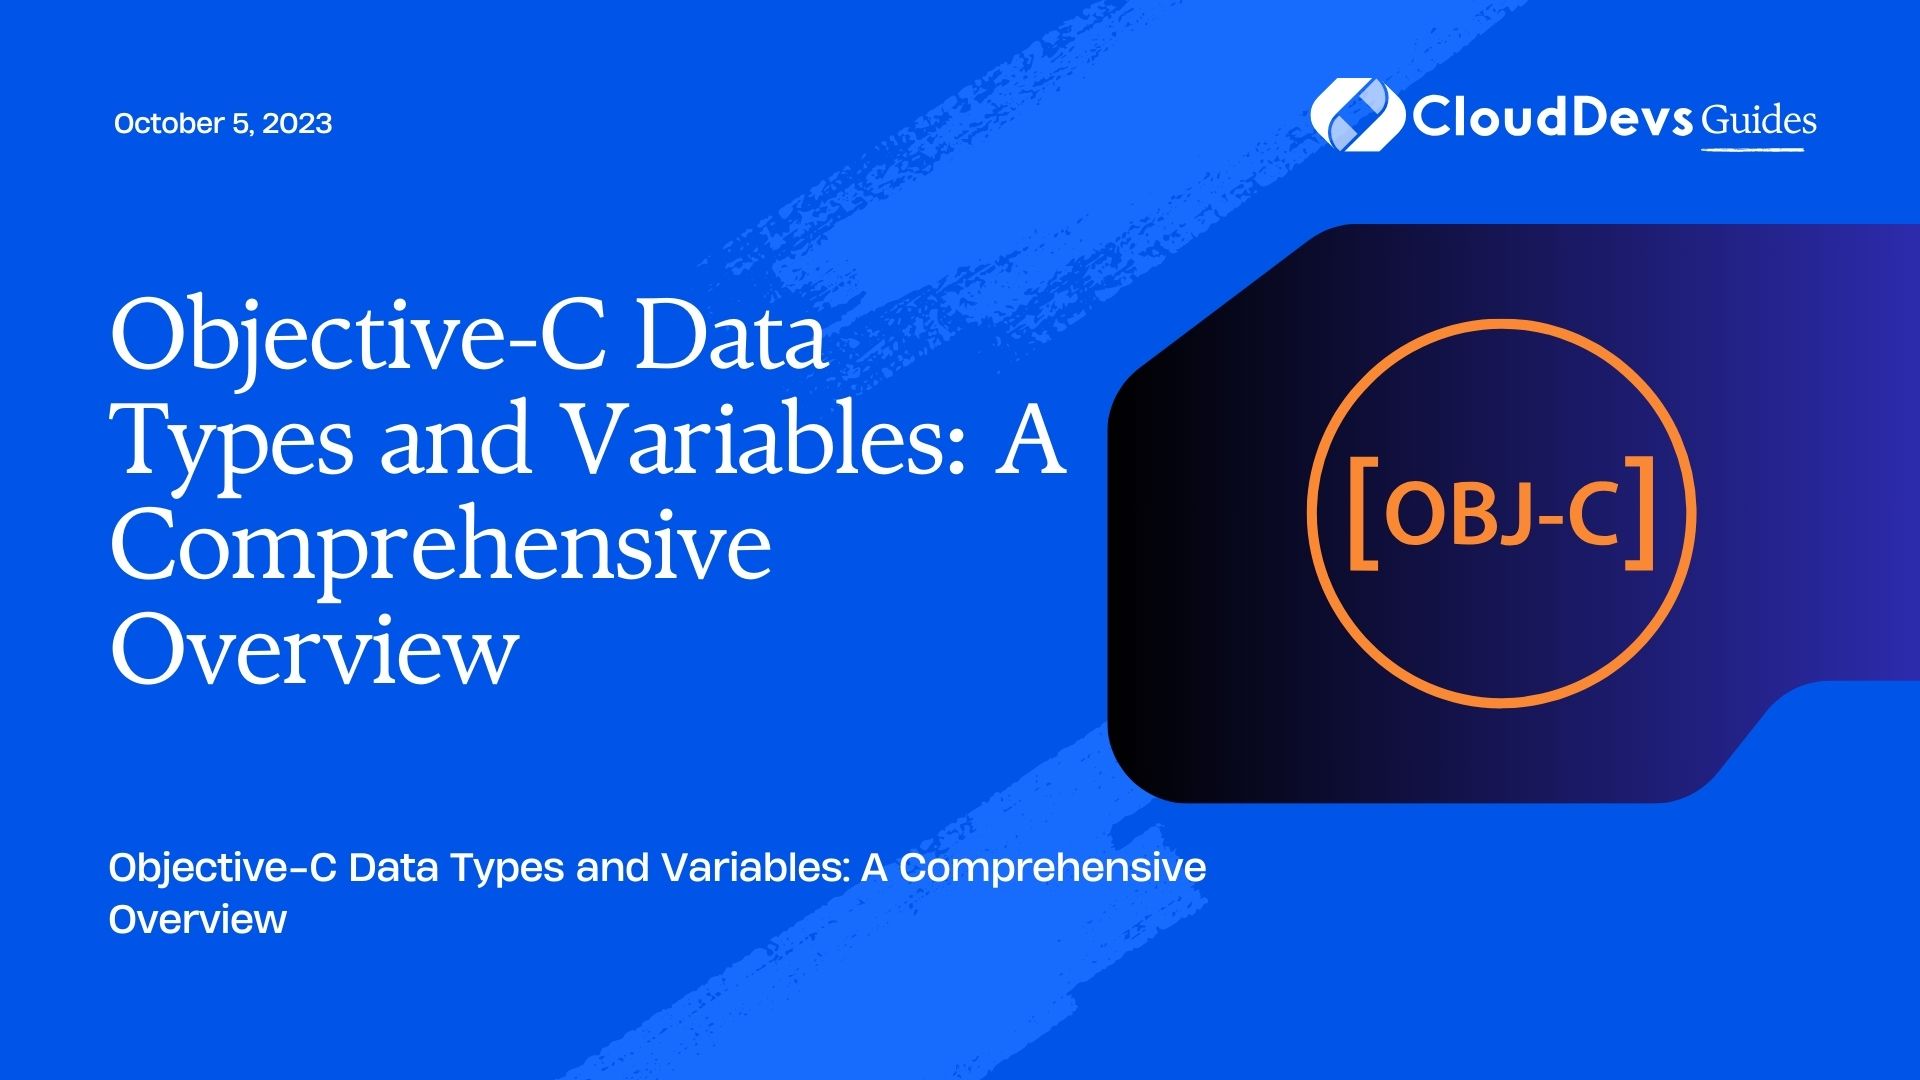 Objective-C Data Types and Variables: A Comprehensive Overview